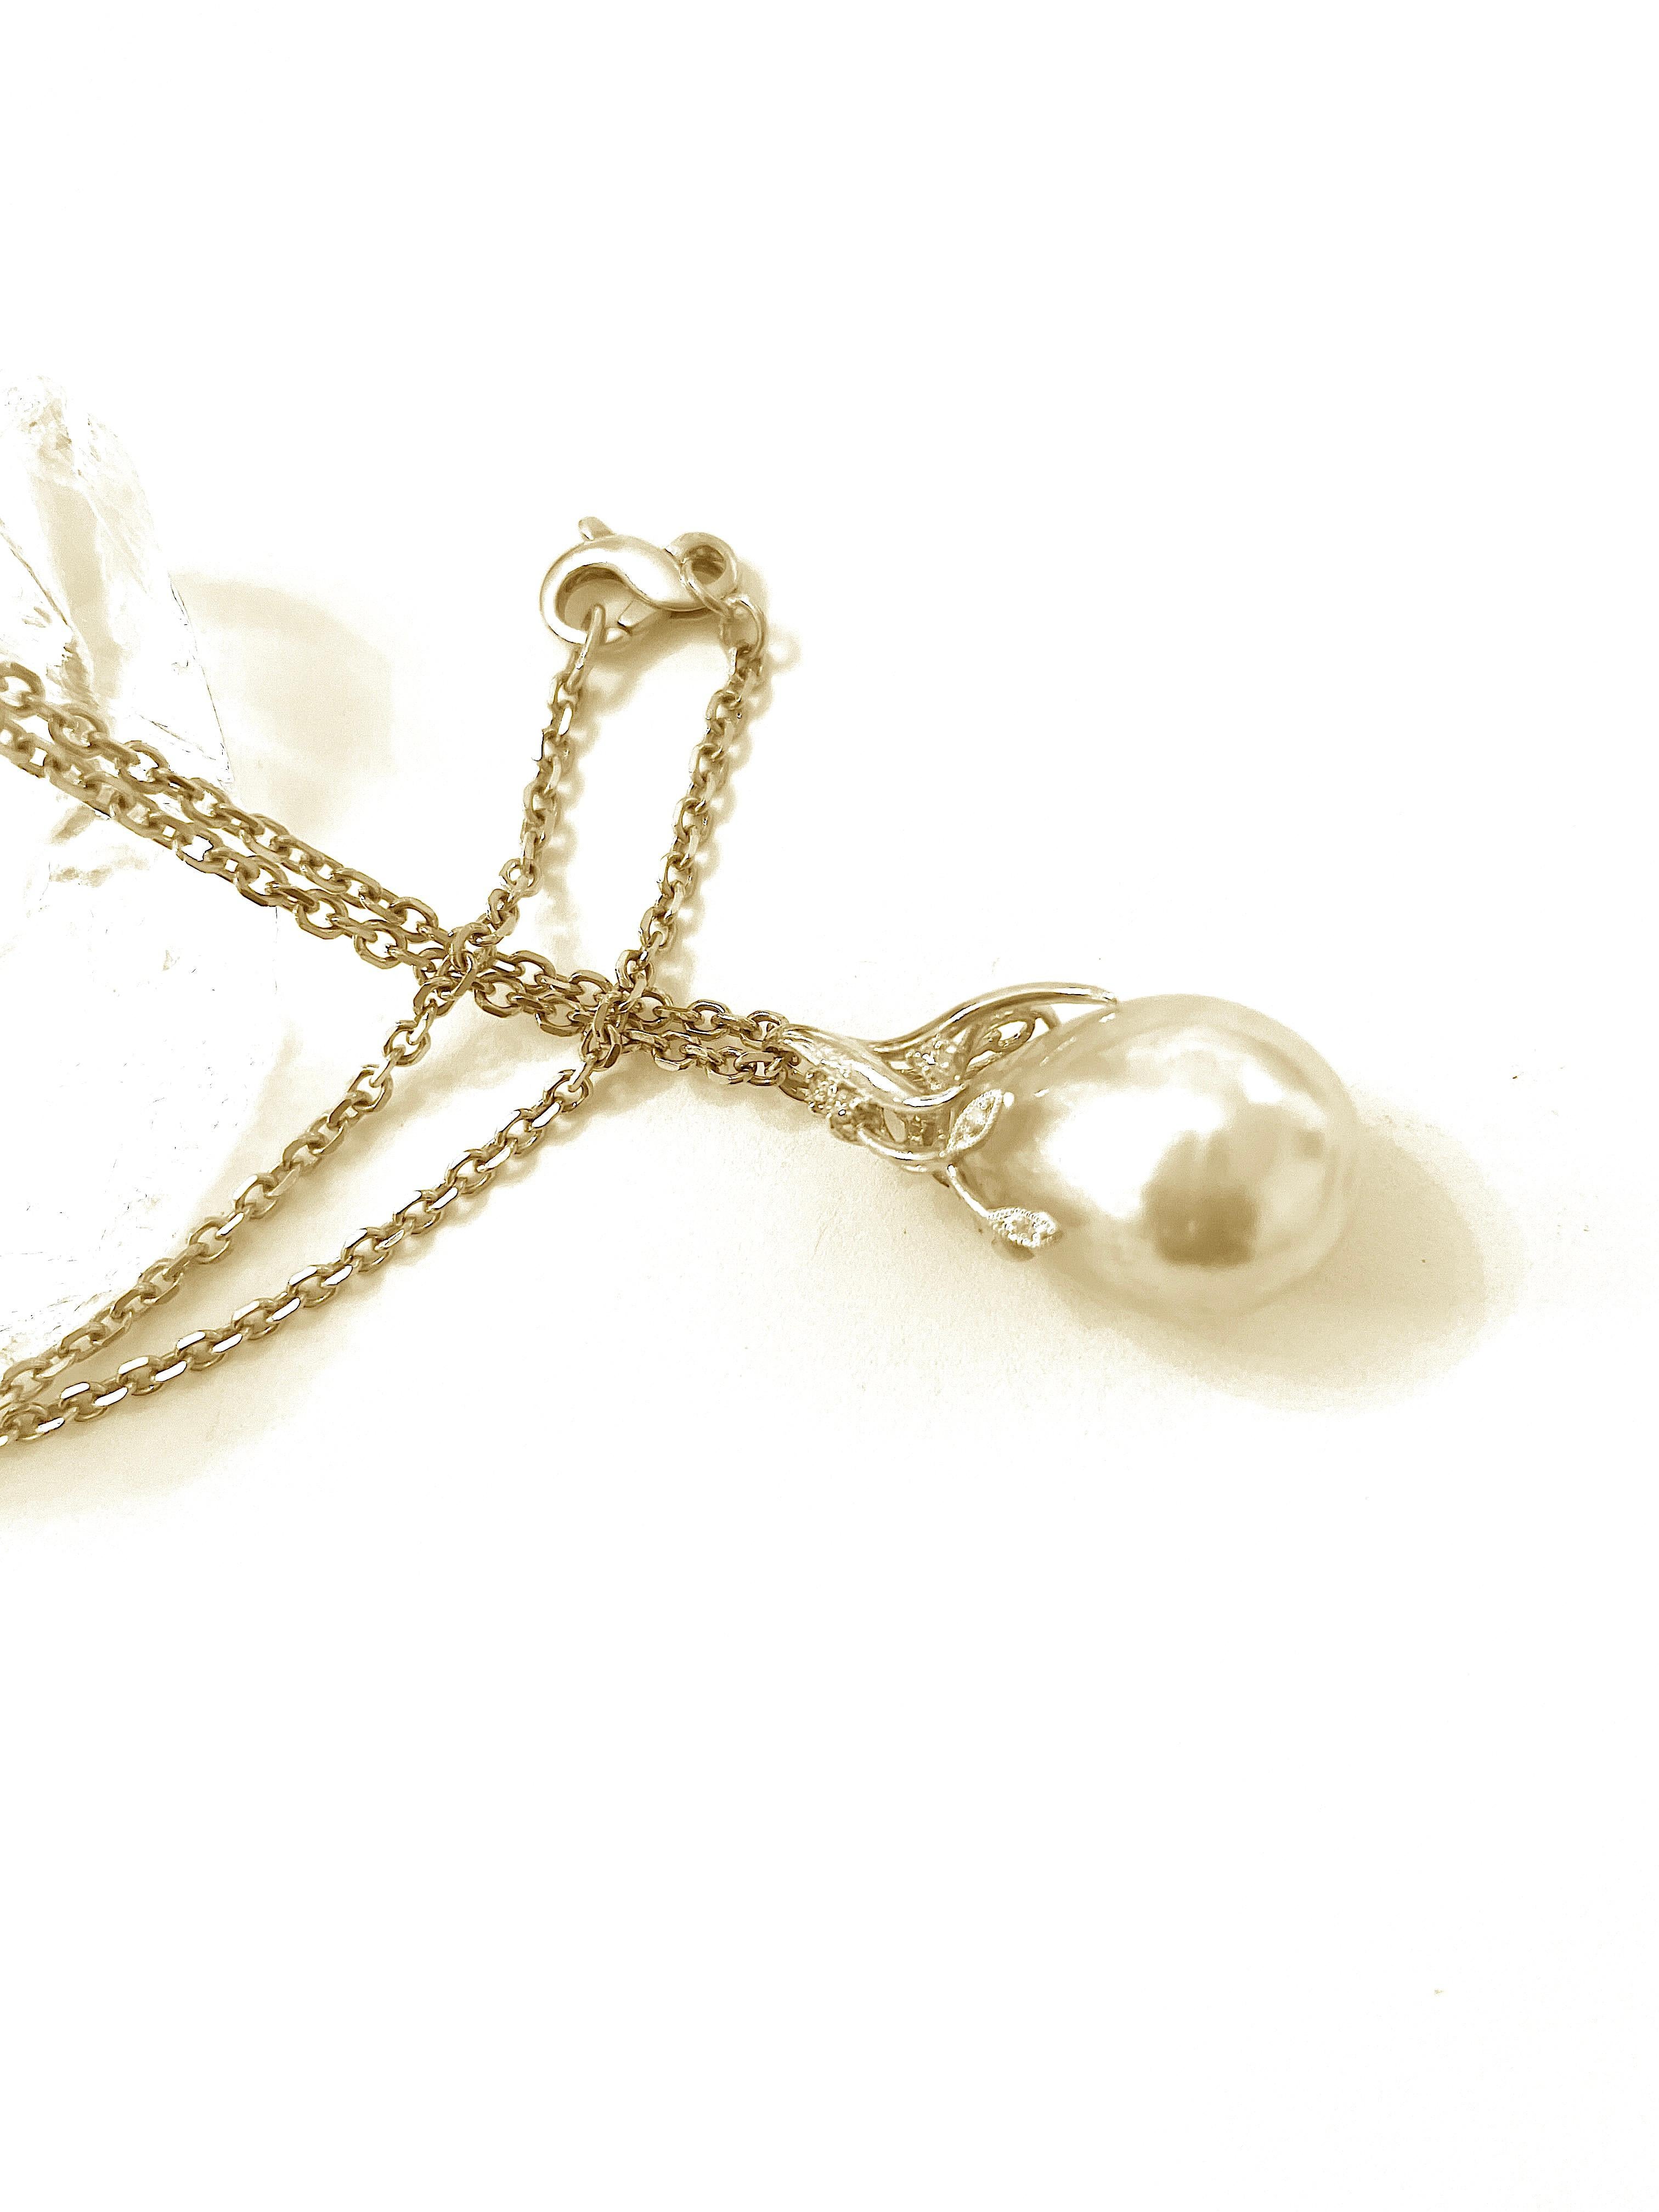 Bead Chain Necklace with Golden South Sea Pearl and Diamond Pendant For Sale